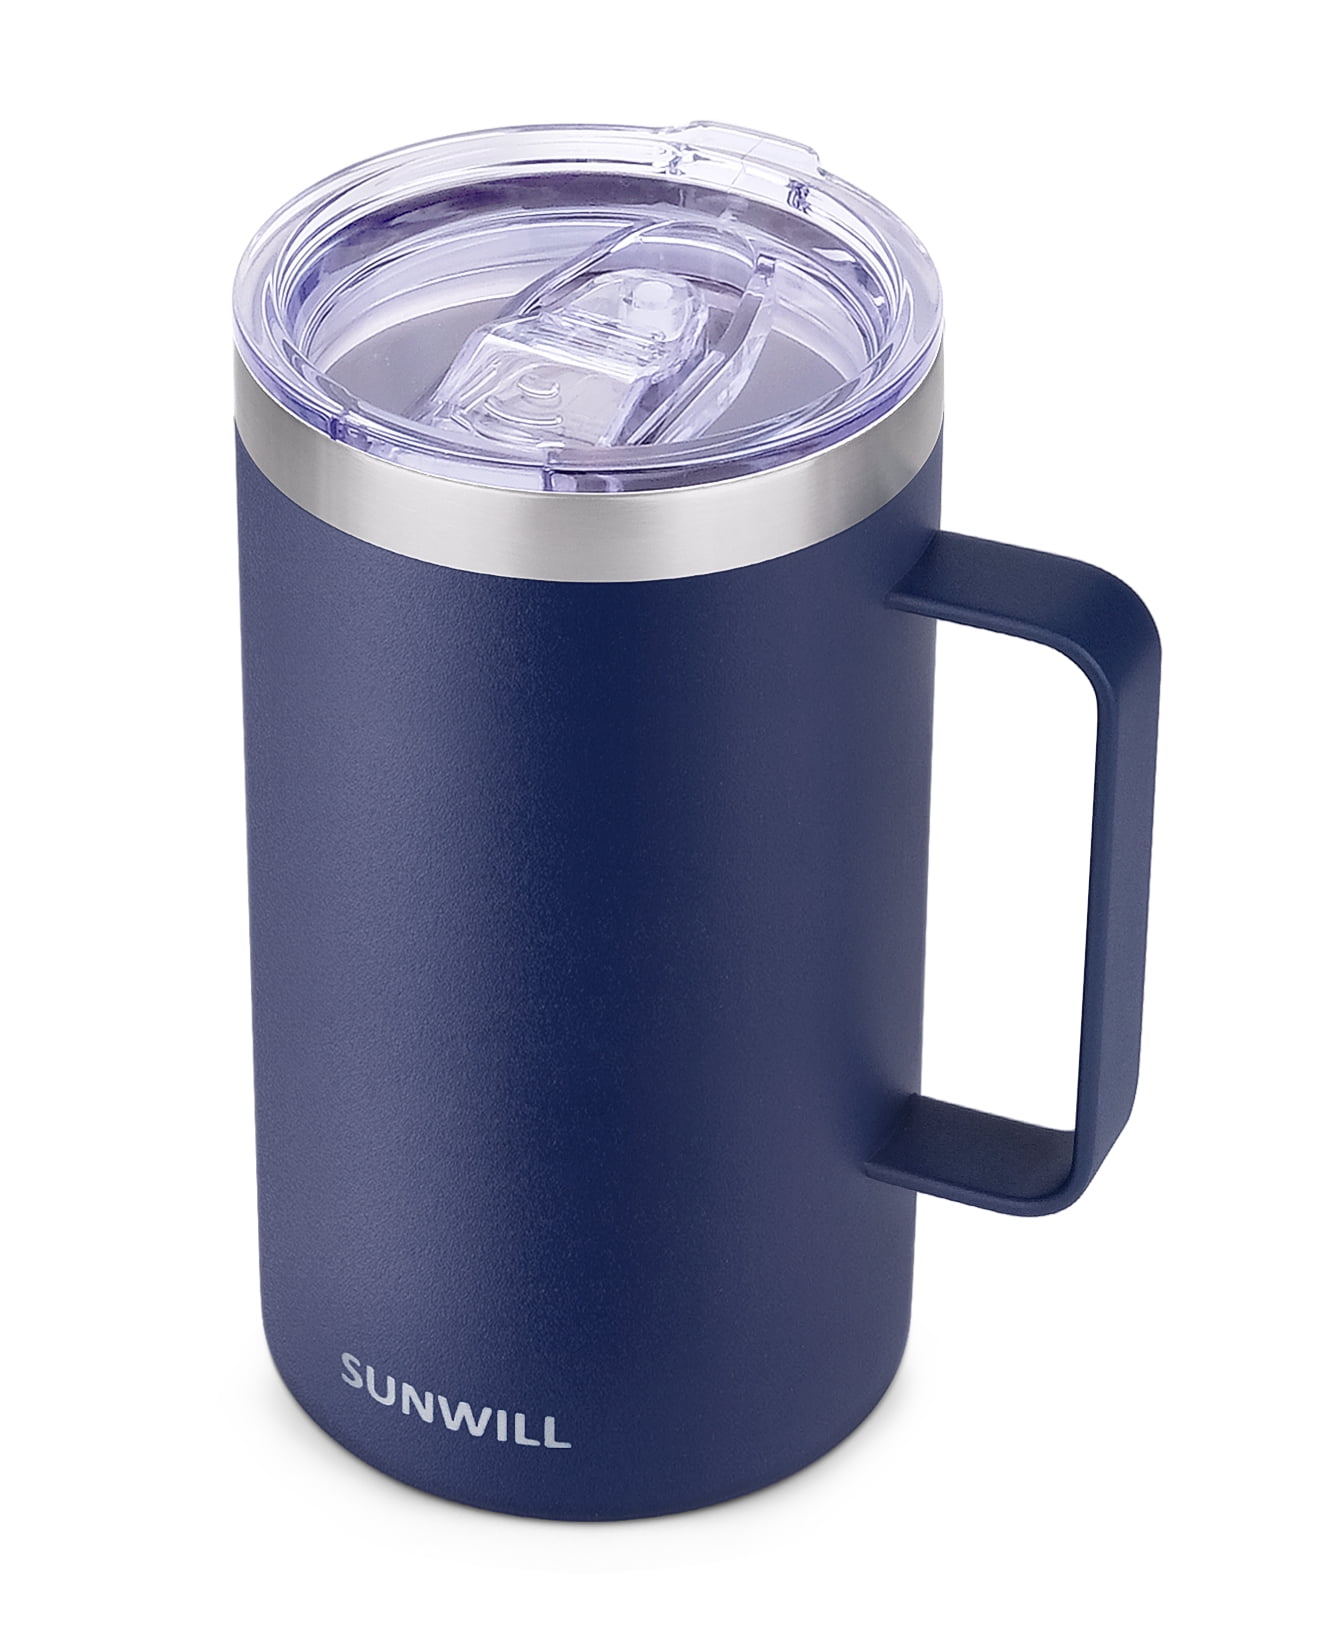 Insulated Mug 12 oz. with Lid, Royal Blue/White (48 per case) - K112L